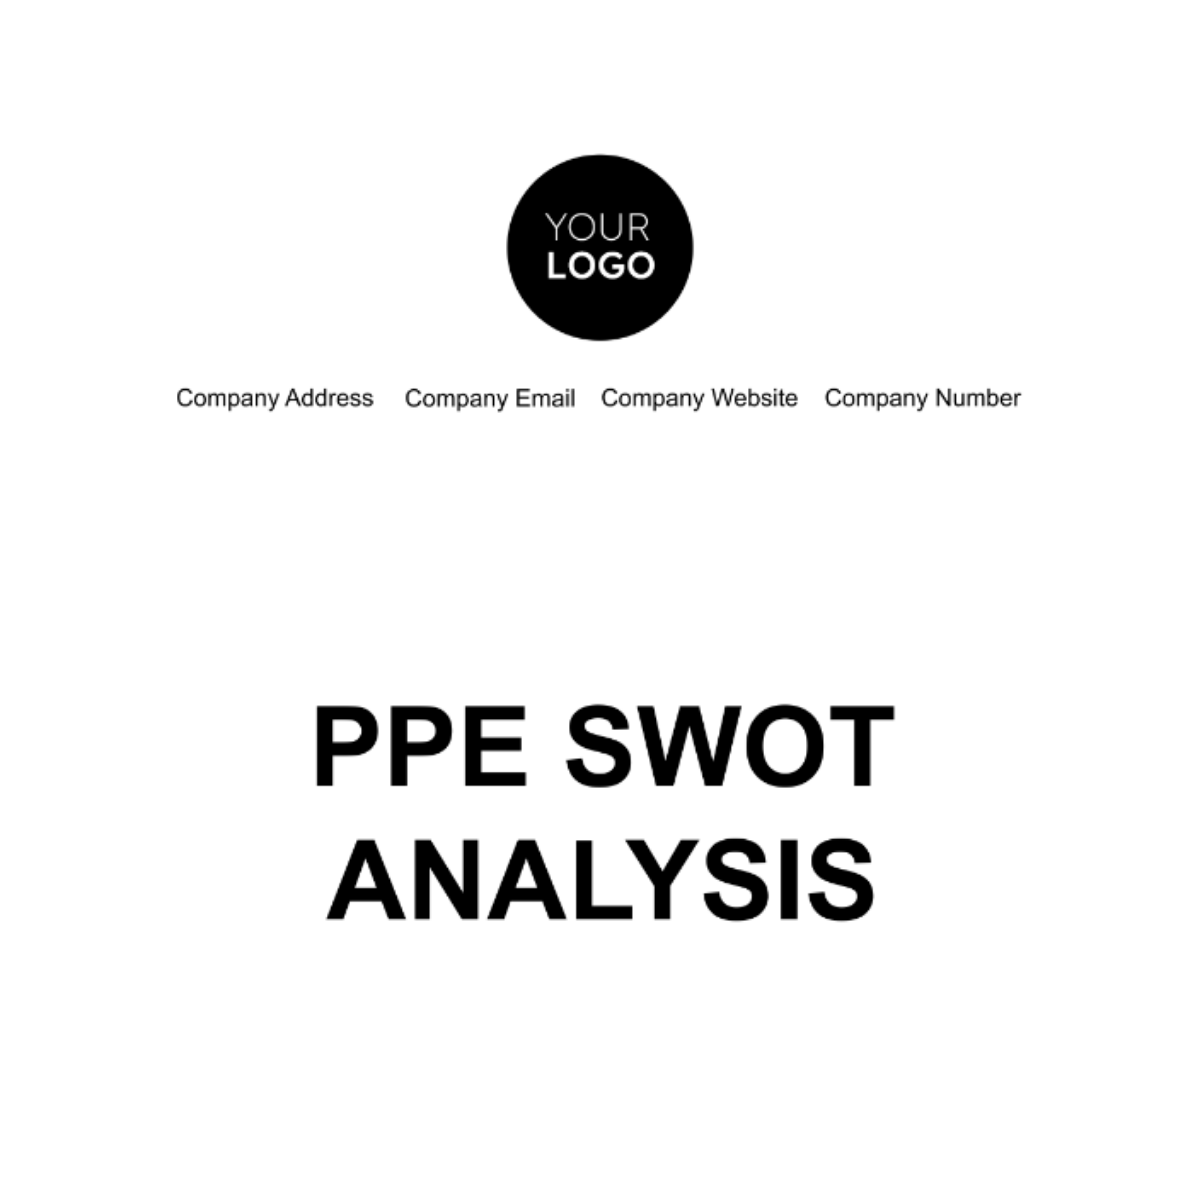 Free PPE SWOT Analysis Template